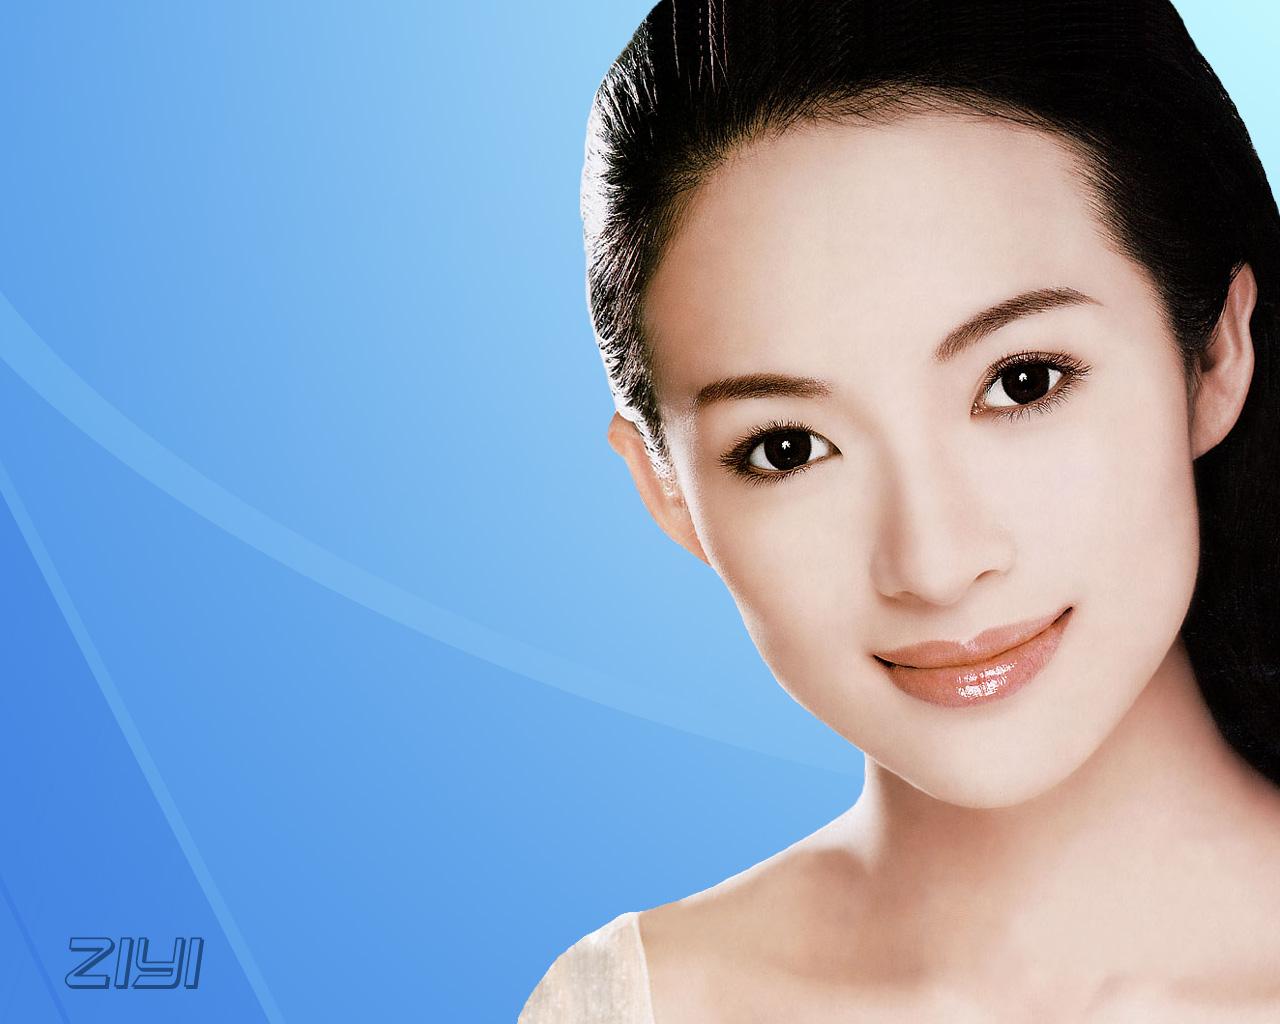 Zhang ziyi - - High Quality and Resolution Wallpapers